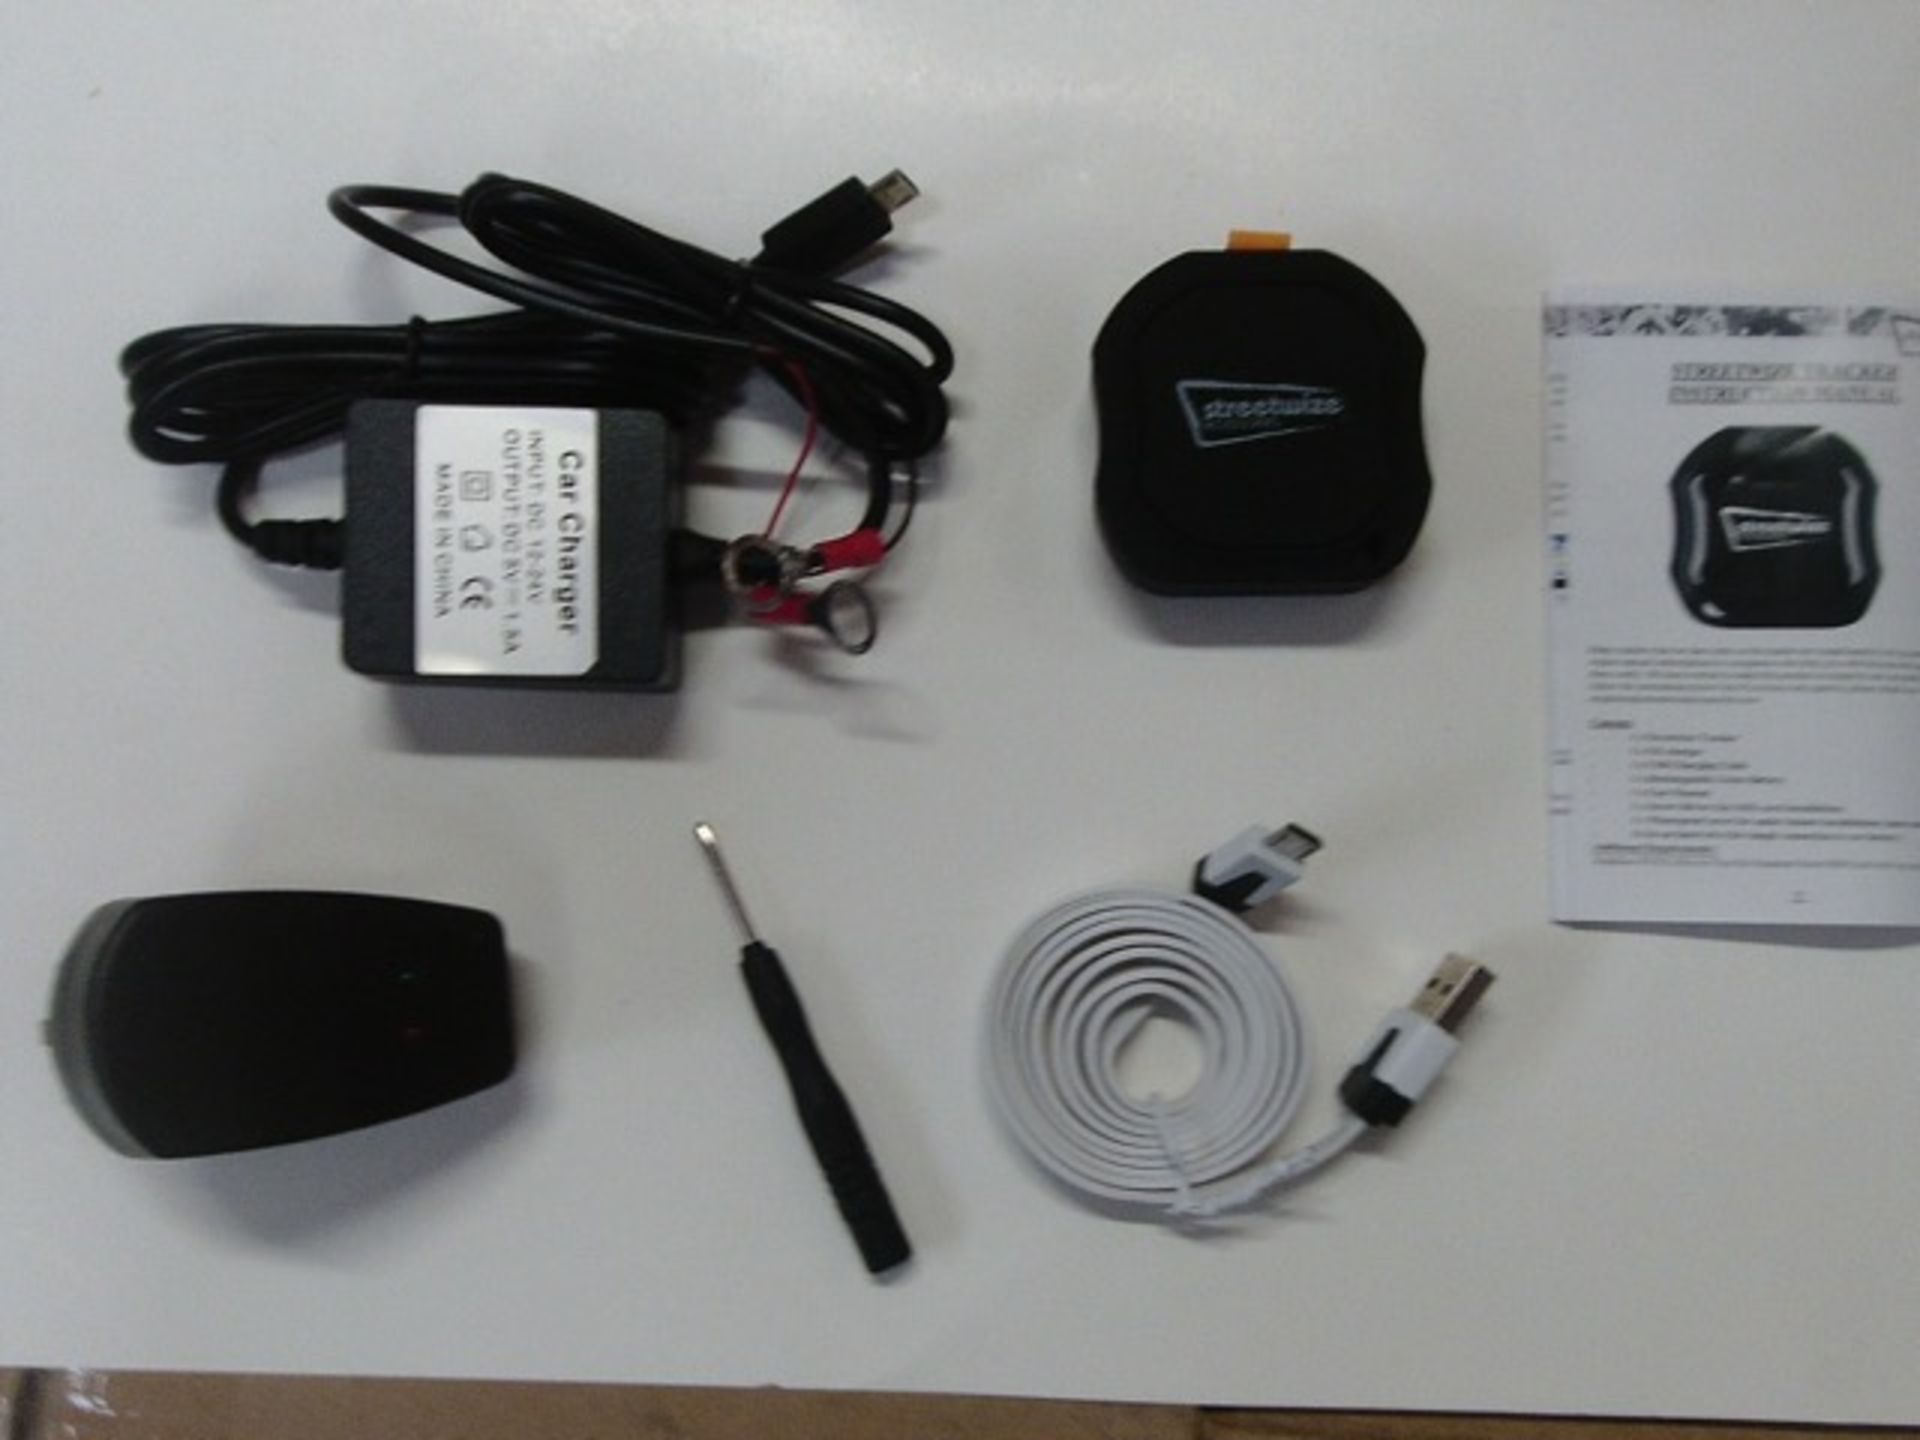 Streetwise Vehicle & personal GPS tracker - rrp £50- £60 . - Image 3 of 3